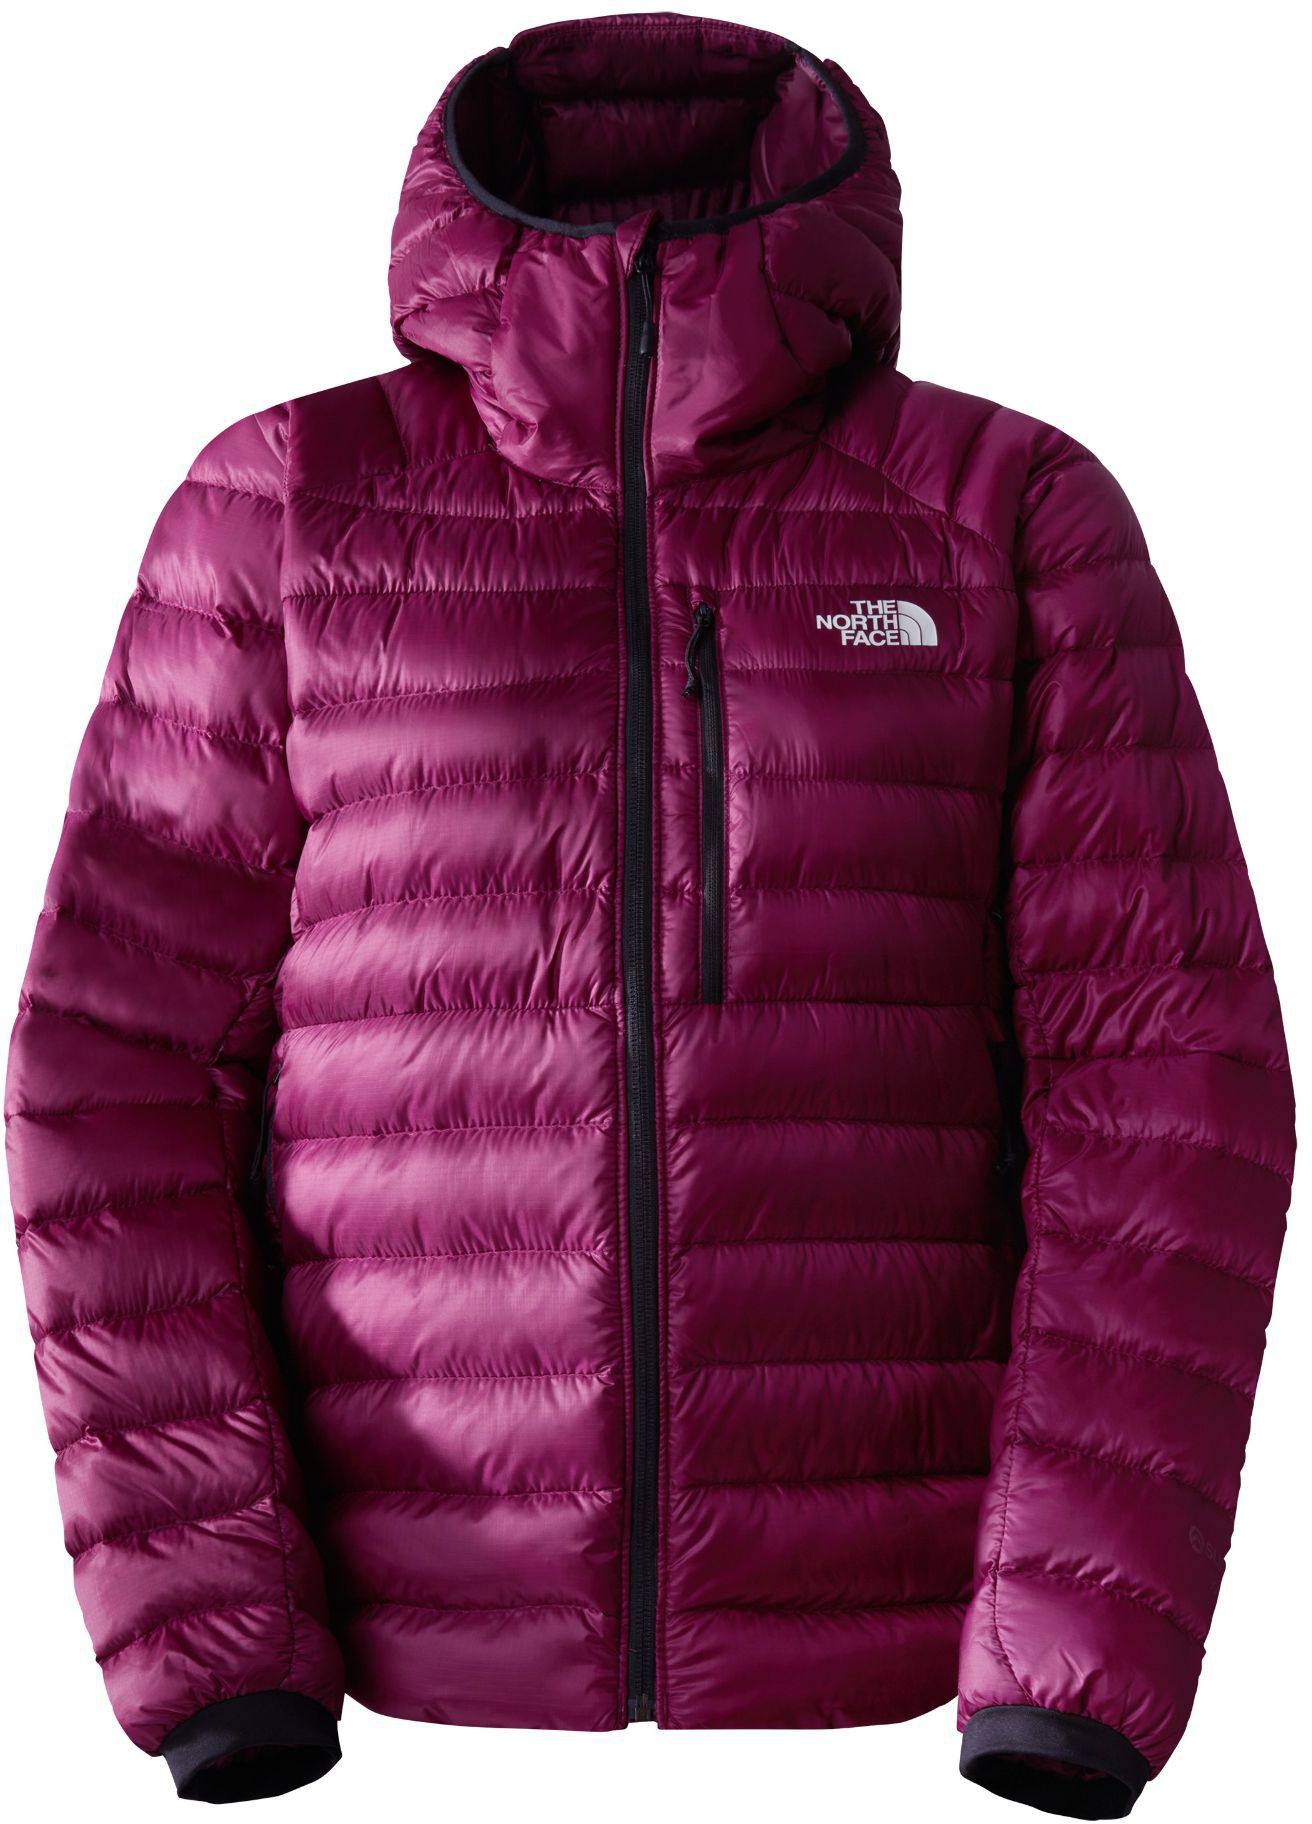 The North Face Women's Breithorn Hoodie